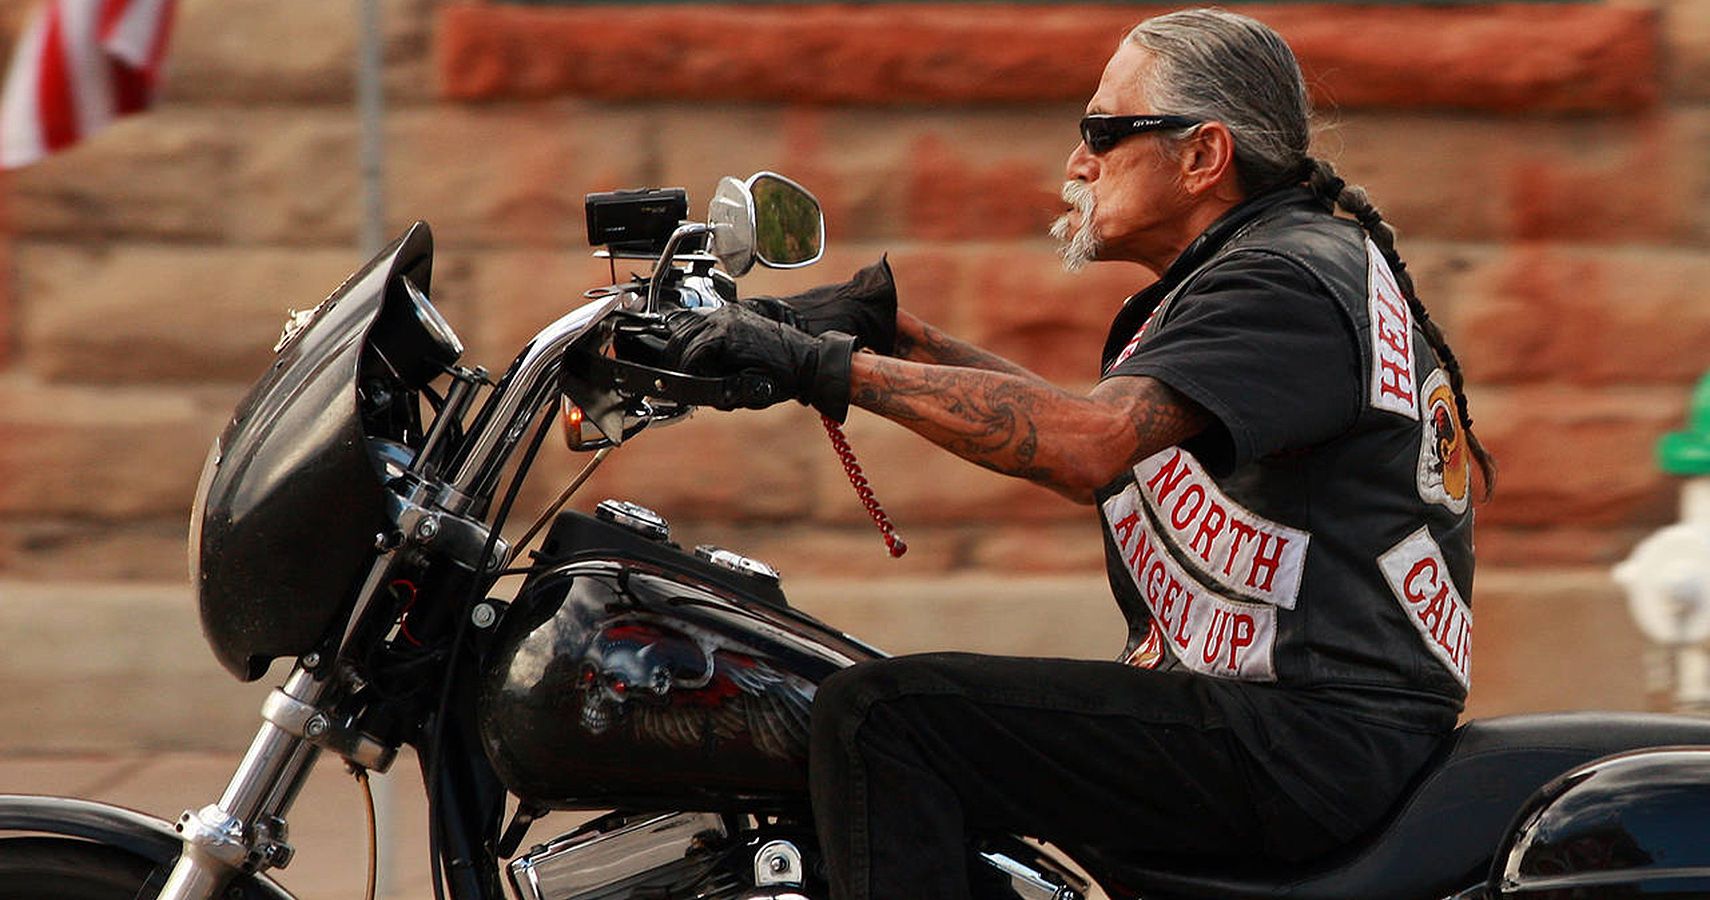 15 Things You Didn't Know About The One-Percenter Motorcycle Clubs